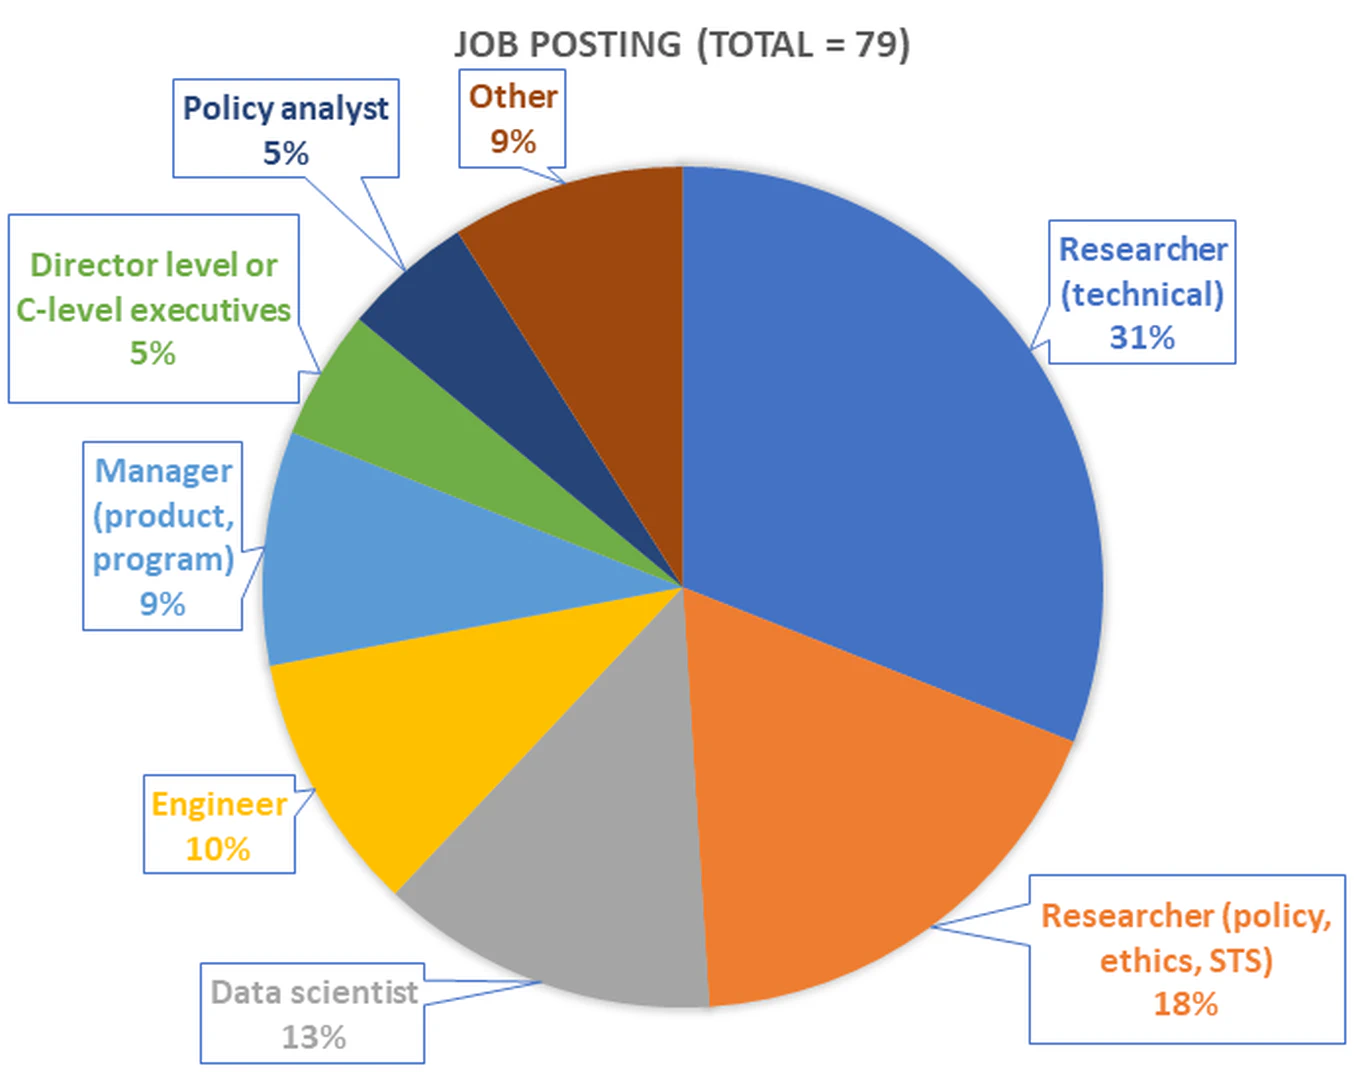 Distribution of occupations represented in the job postings dataset